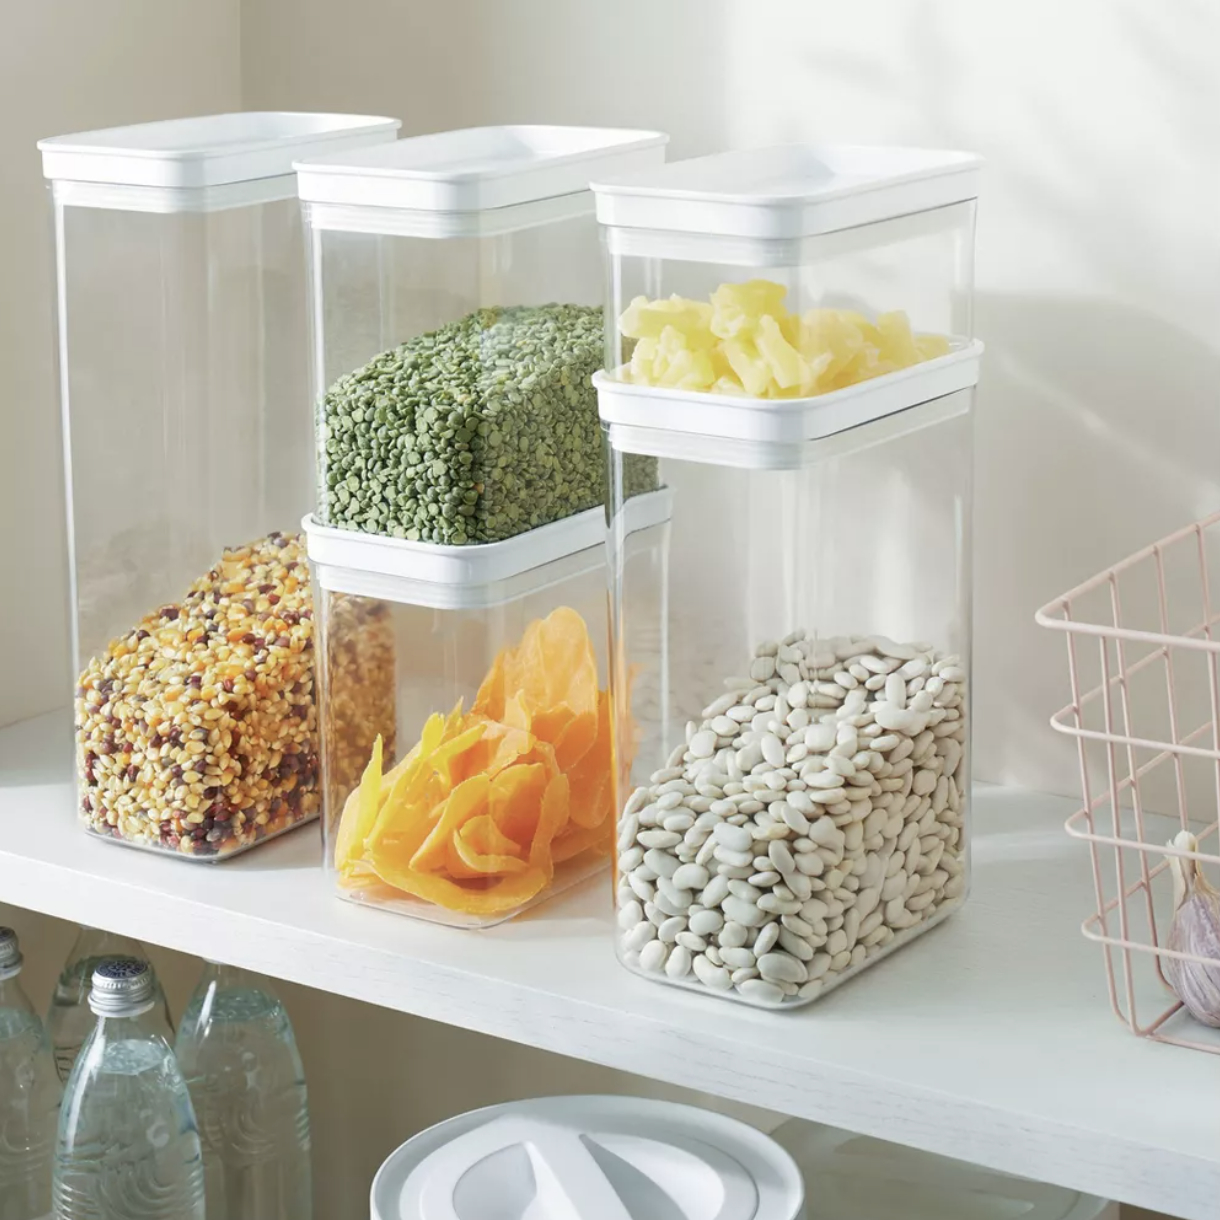 A set of five airtight food storage canisters